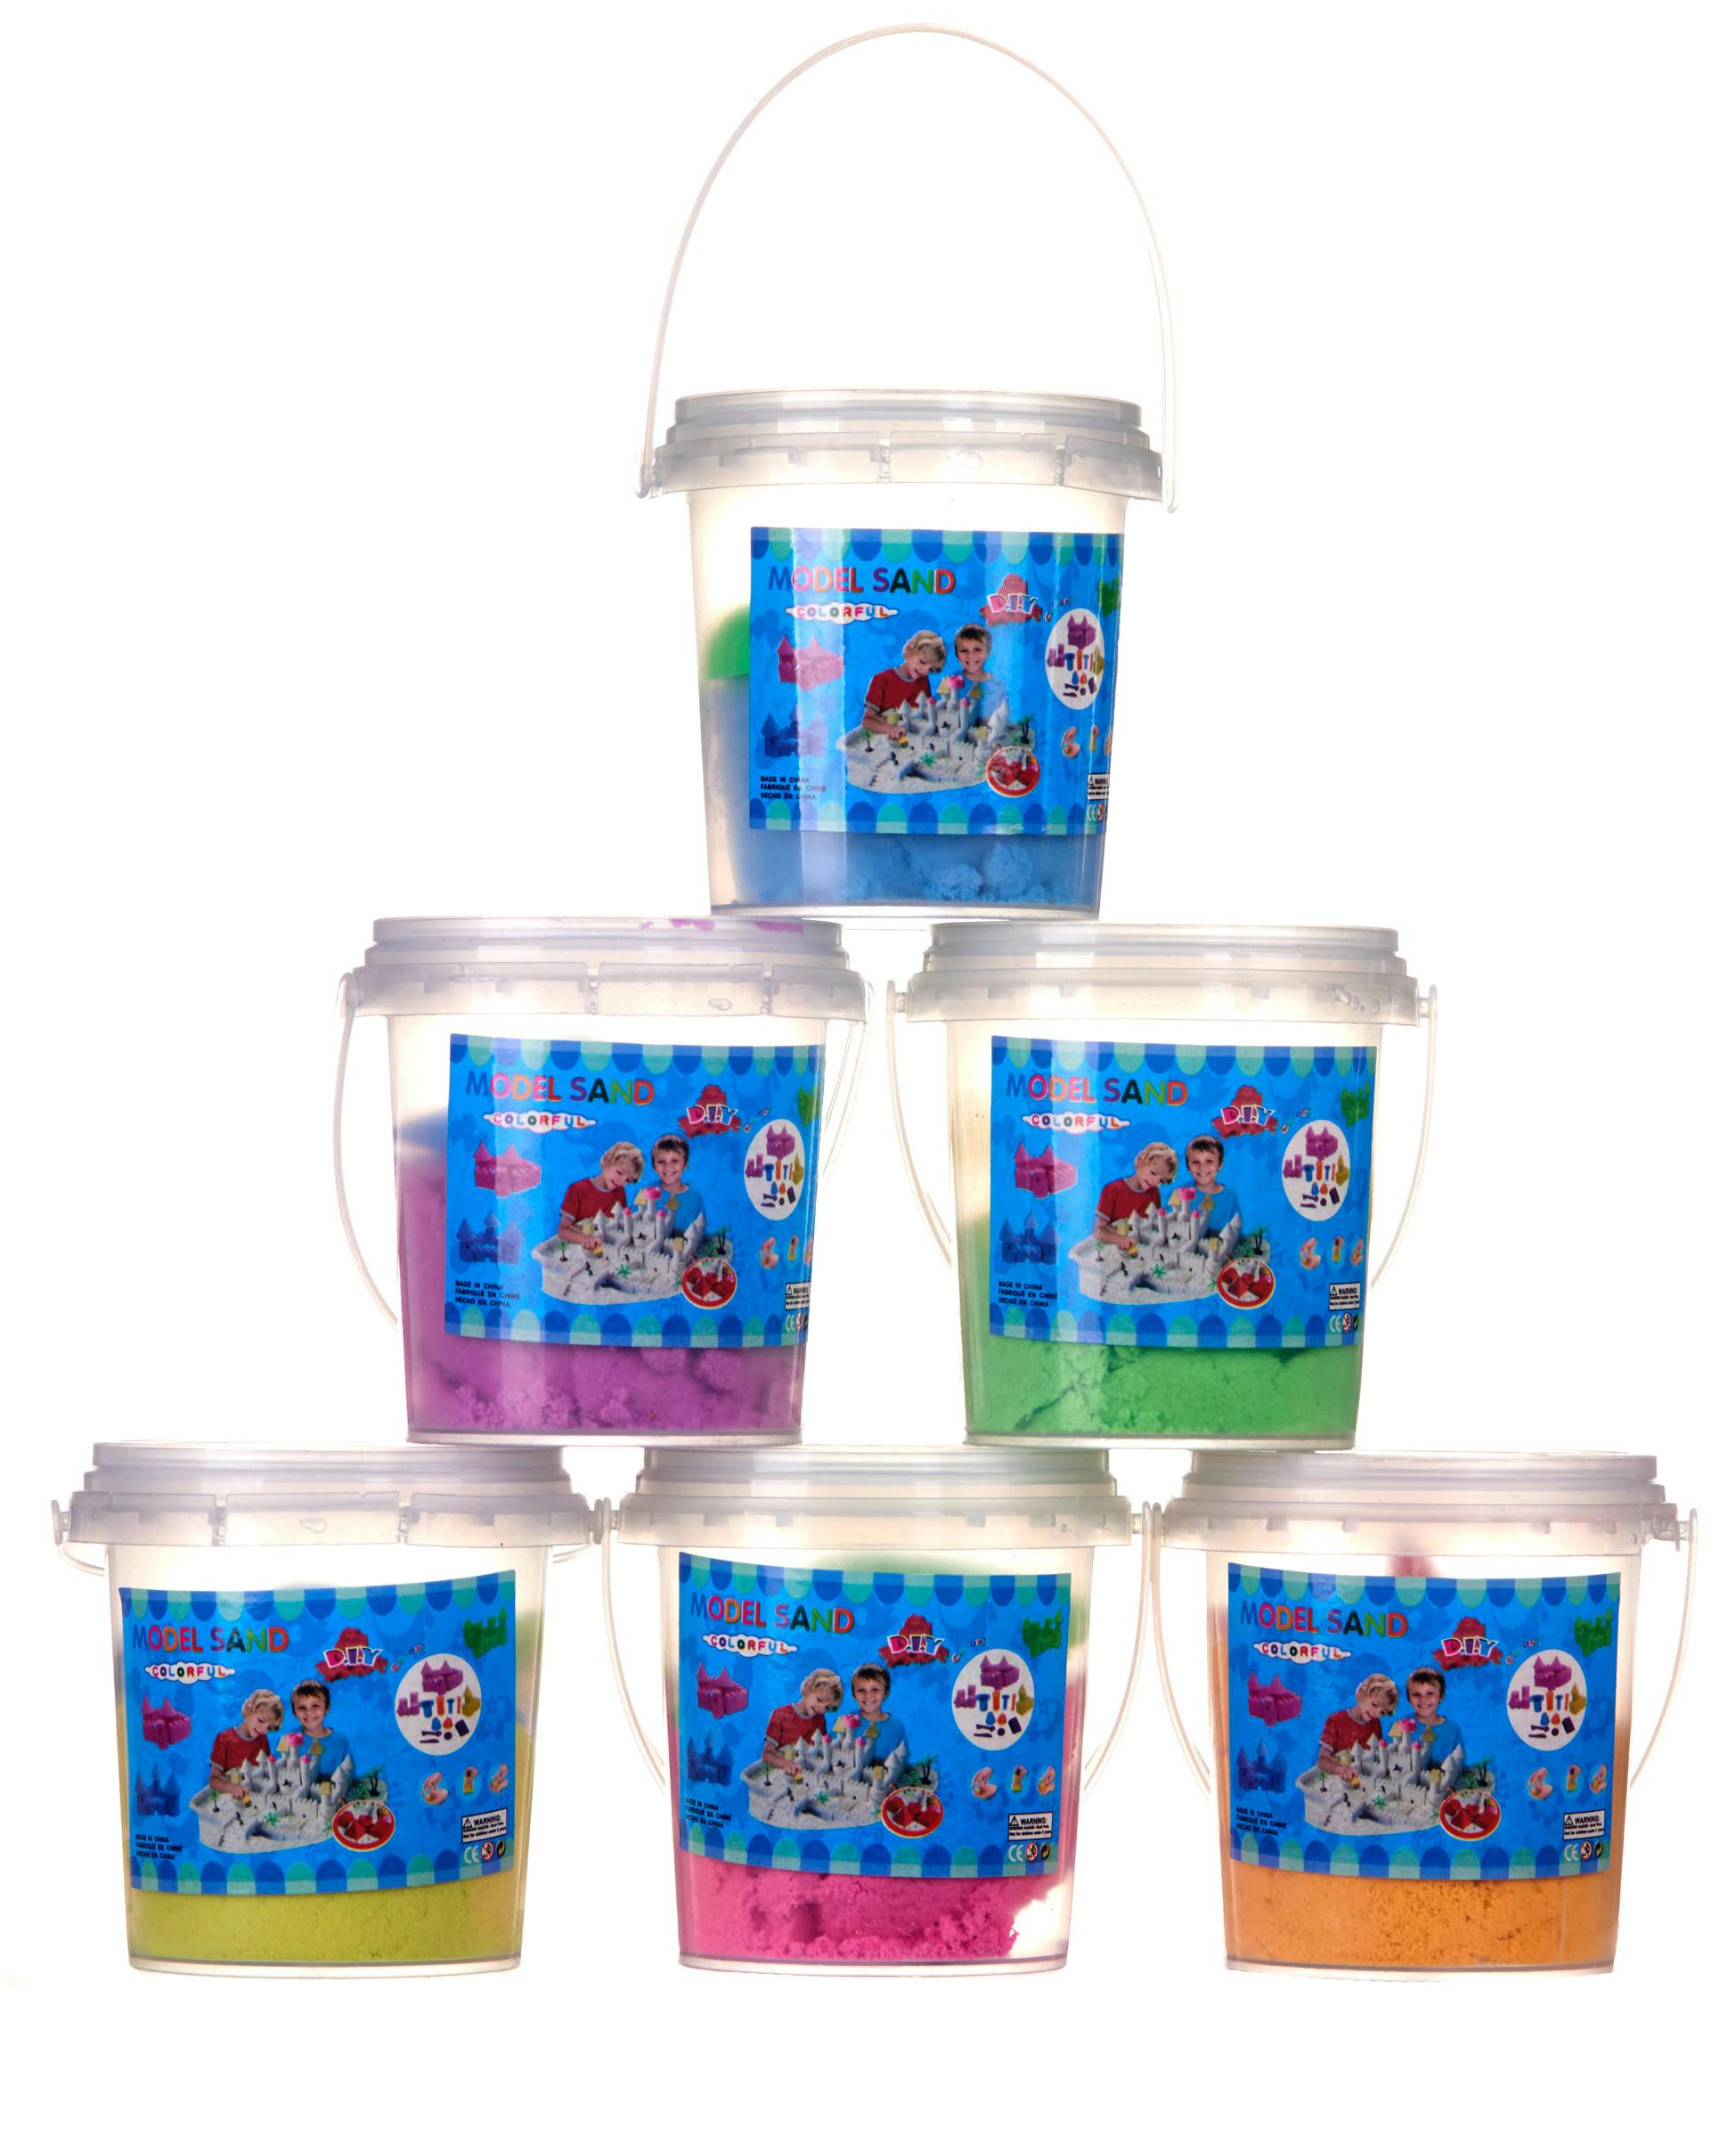 Product - Bucket of Magic Sand with Spades